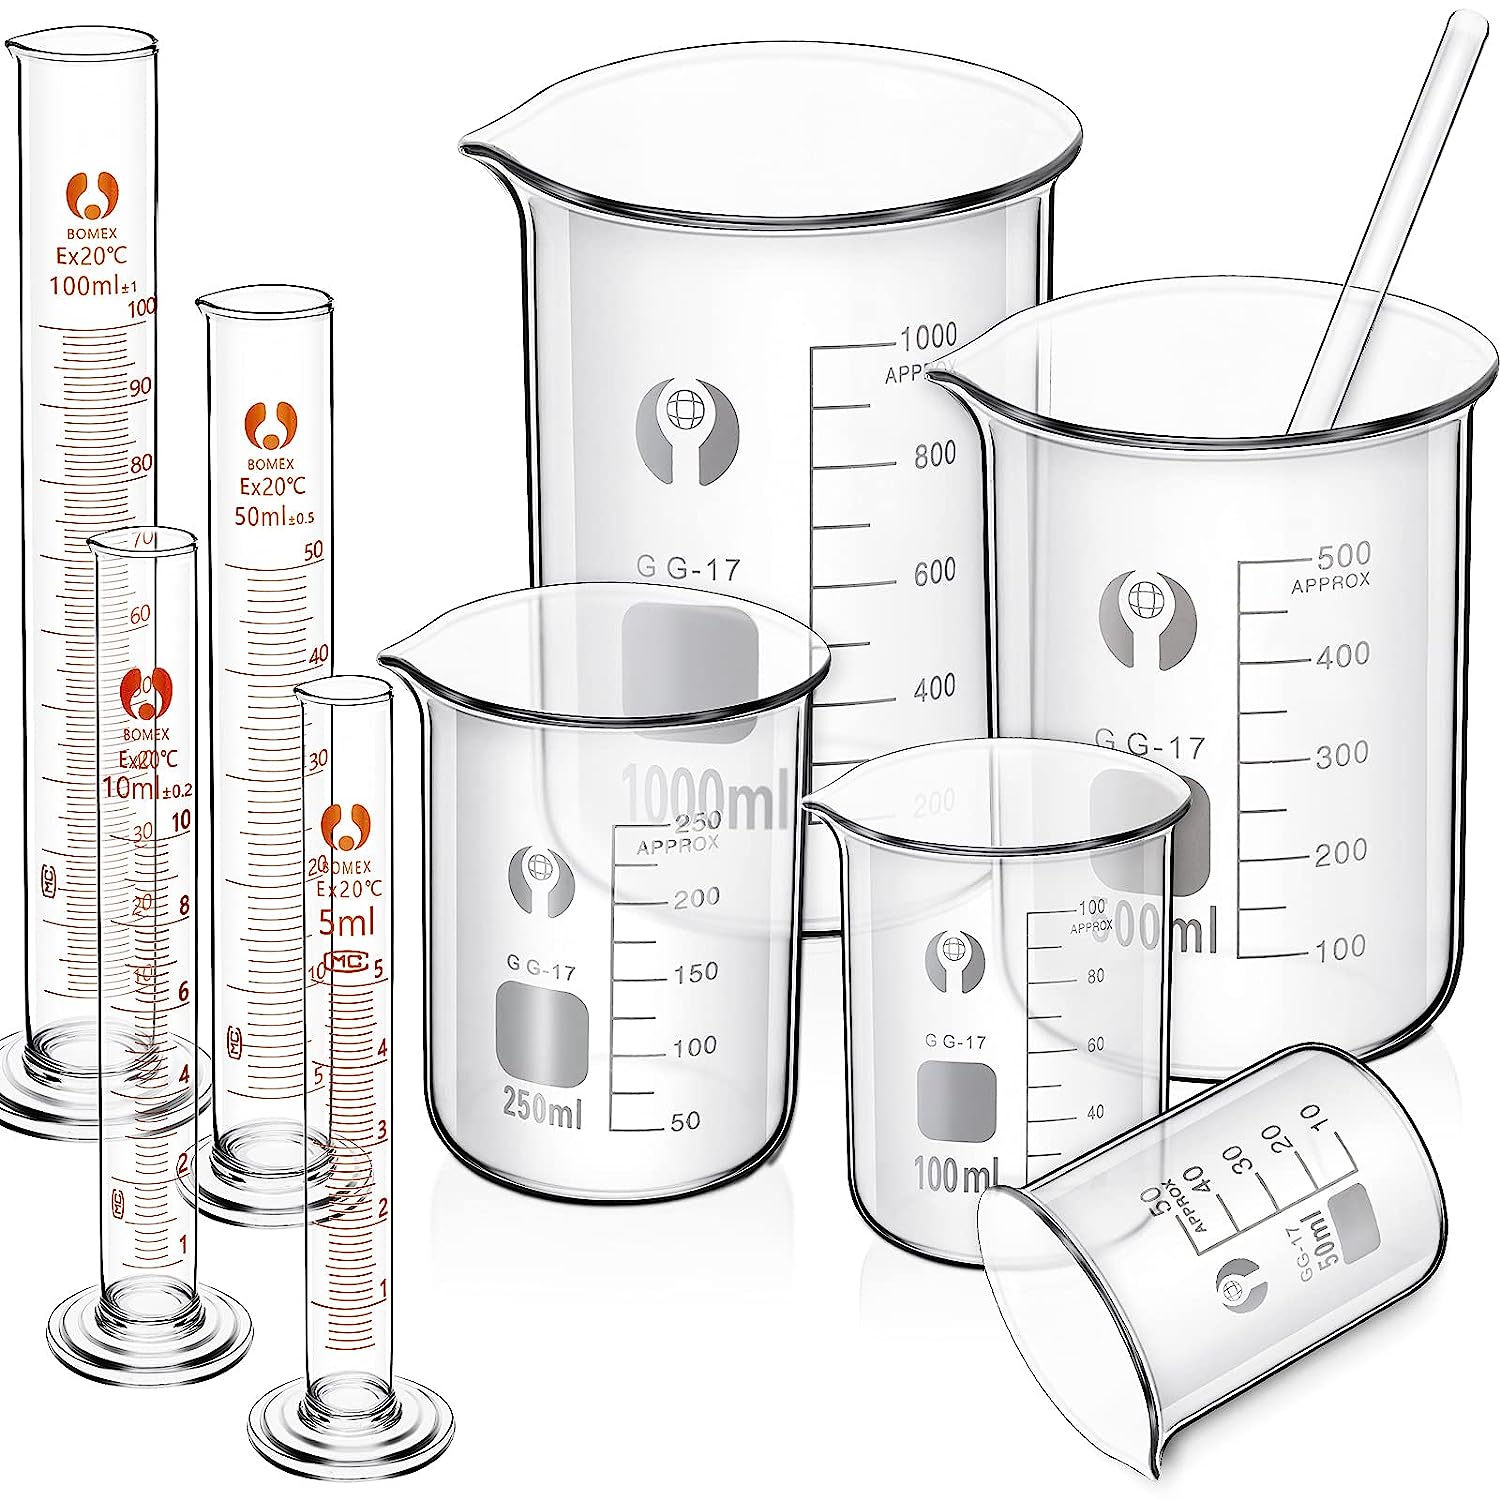 Baluue 10ml Lab Graduated Measuring Cup with Spout Wide Mouth Glass Conical Beaker Liquid Dispenser Measuring Cylinder Experiment Tool for School